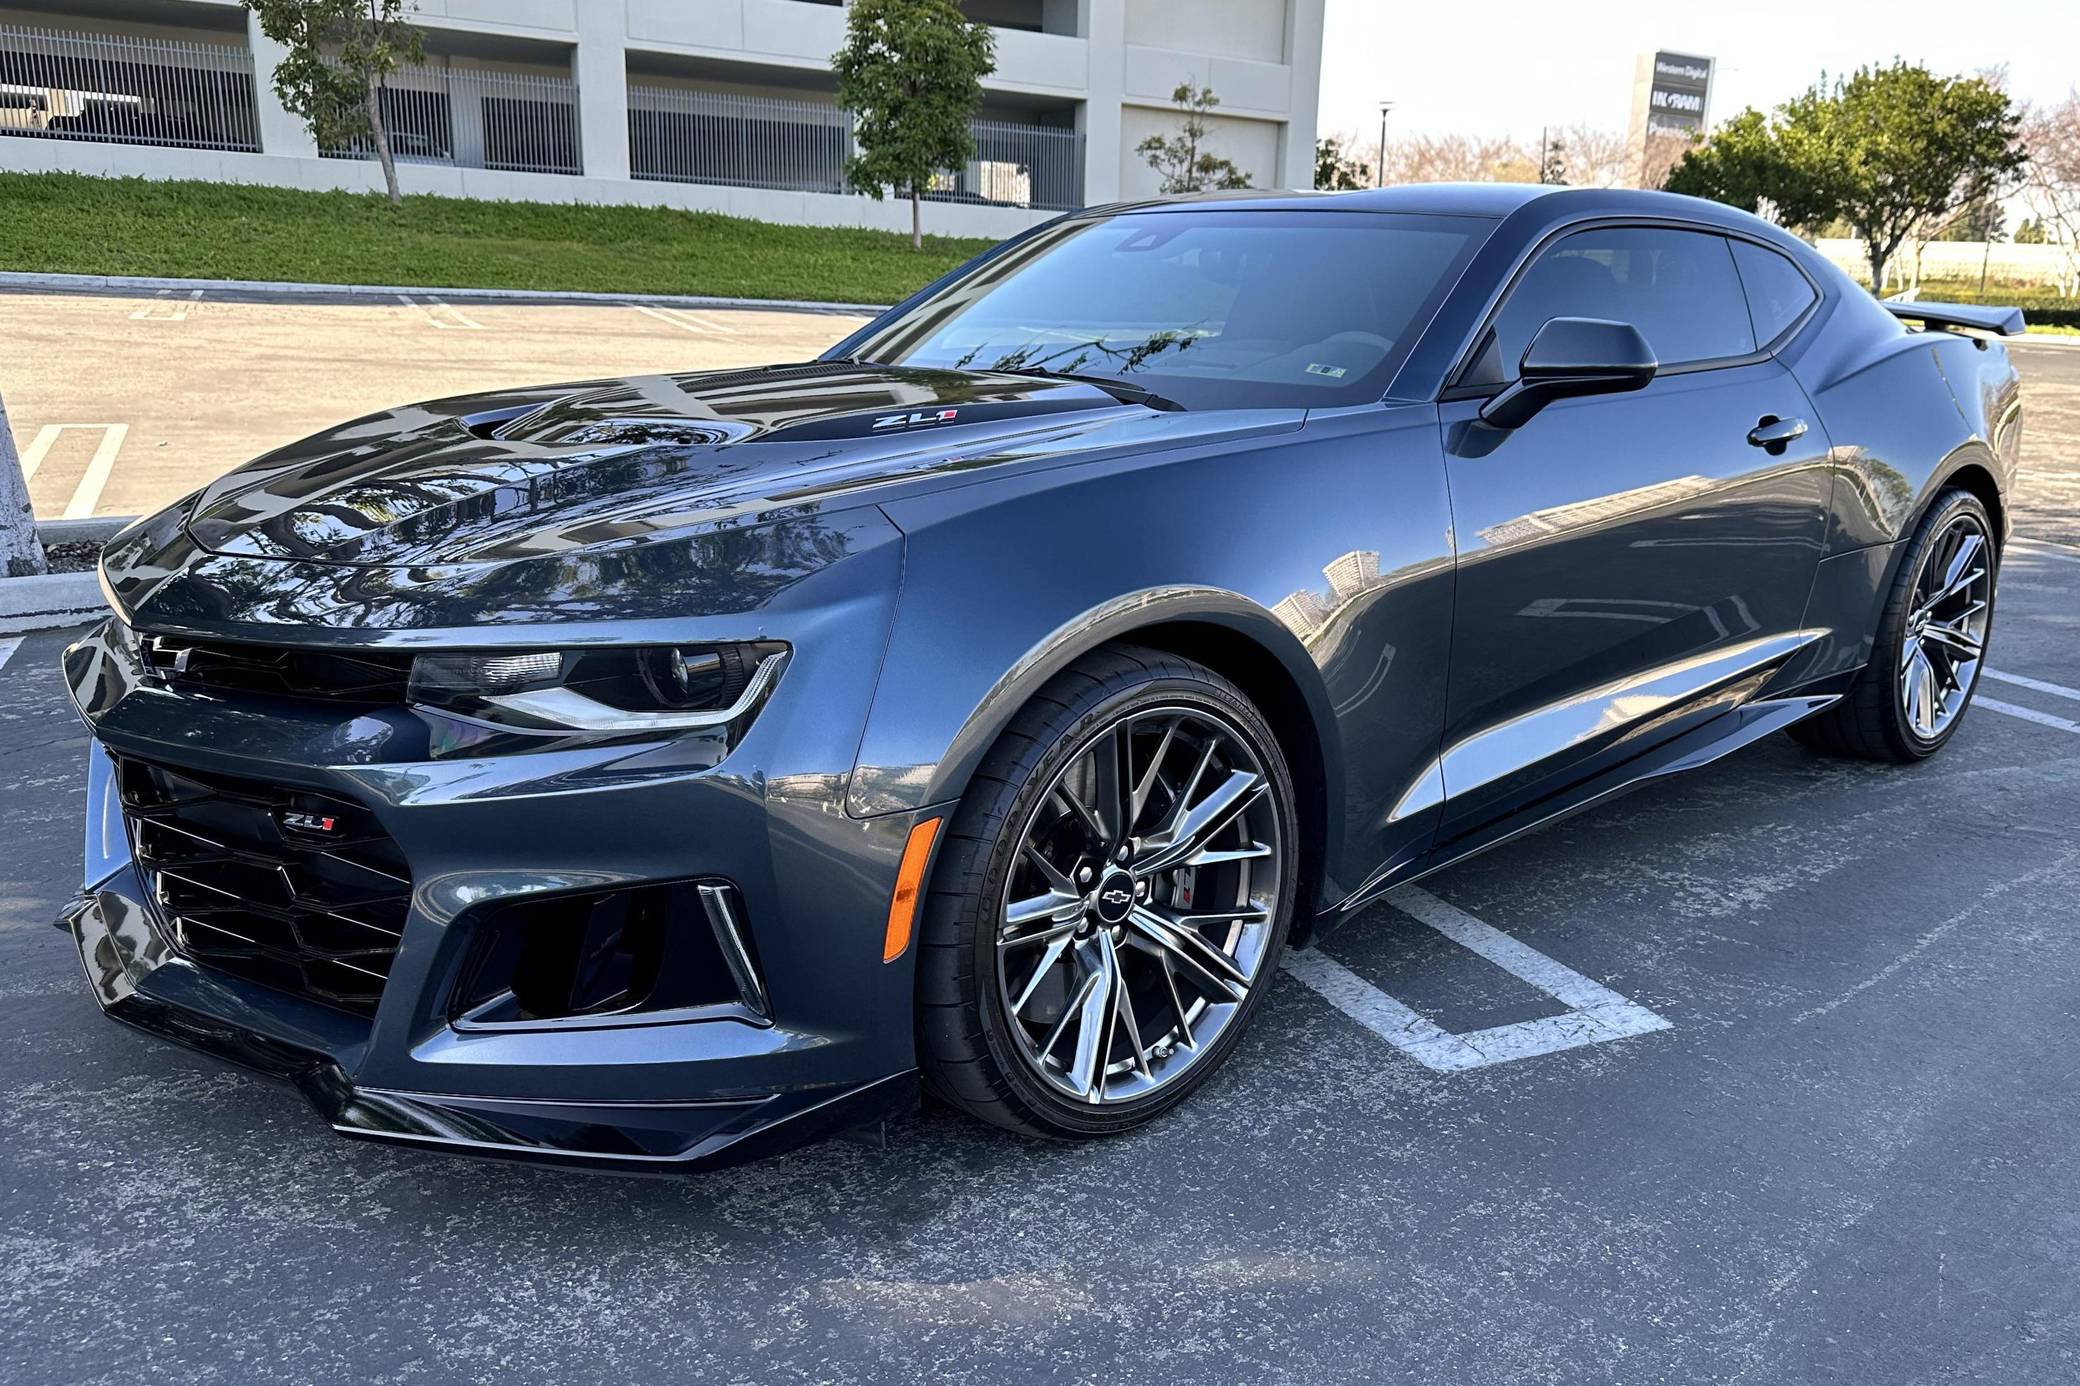 2023 Chevrolet Camaro Zl1 Ownership Review Team Bhp 43 Off